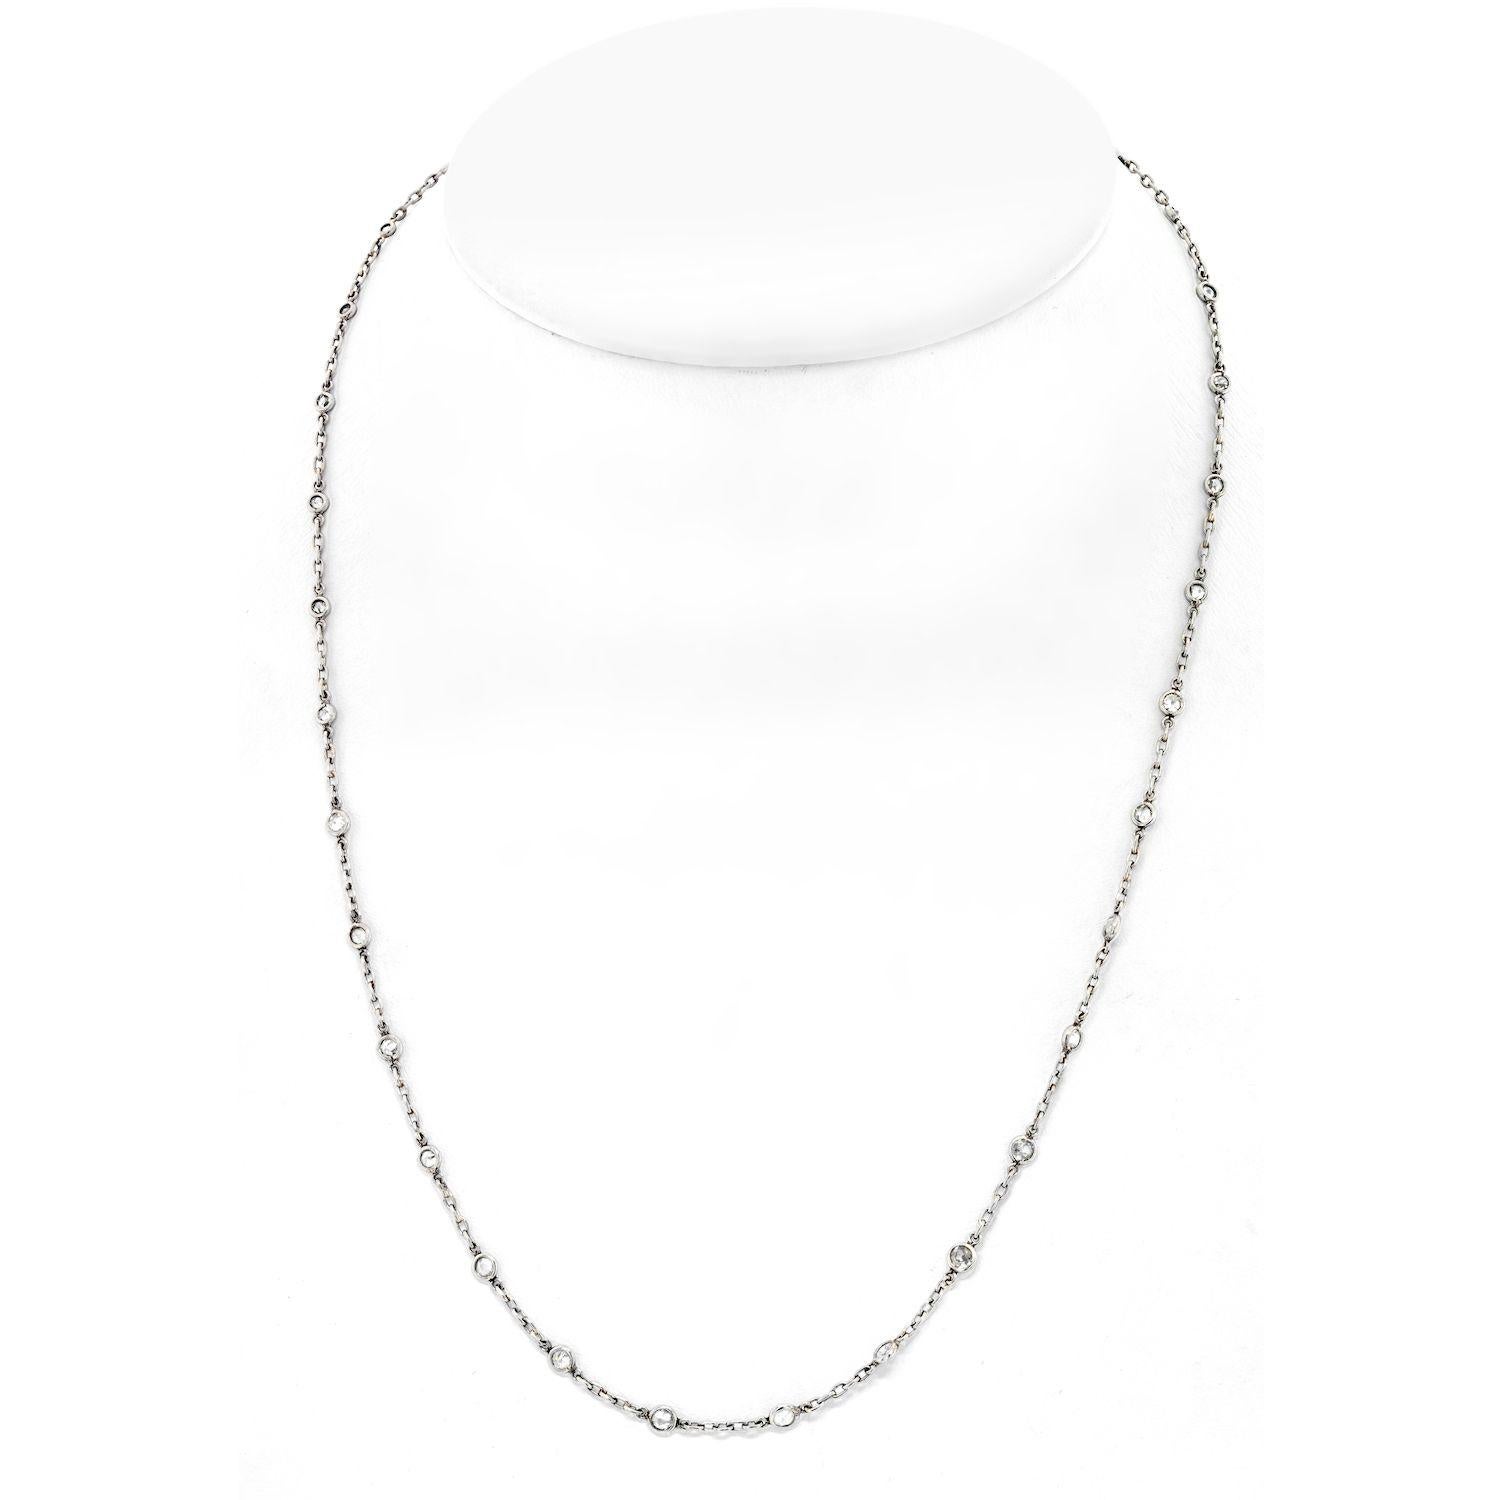 The platinum diamond by the yard chain necklace is a delicate and elegant piece of jewelry that exudes understated luxury. Measuring 20 inches in length, this chain necklace is long enough to be worn on its own or layered with other necklaces for a